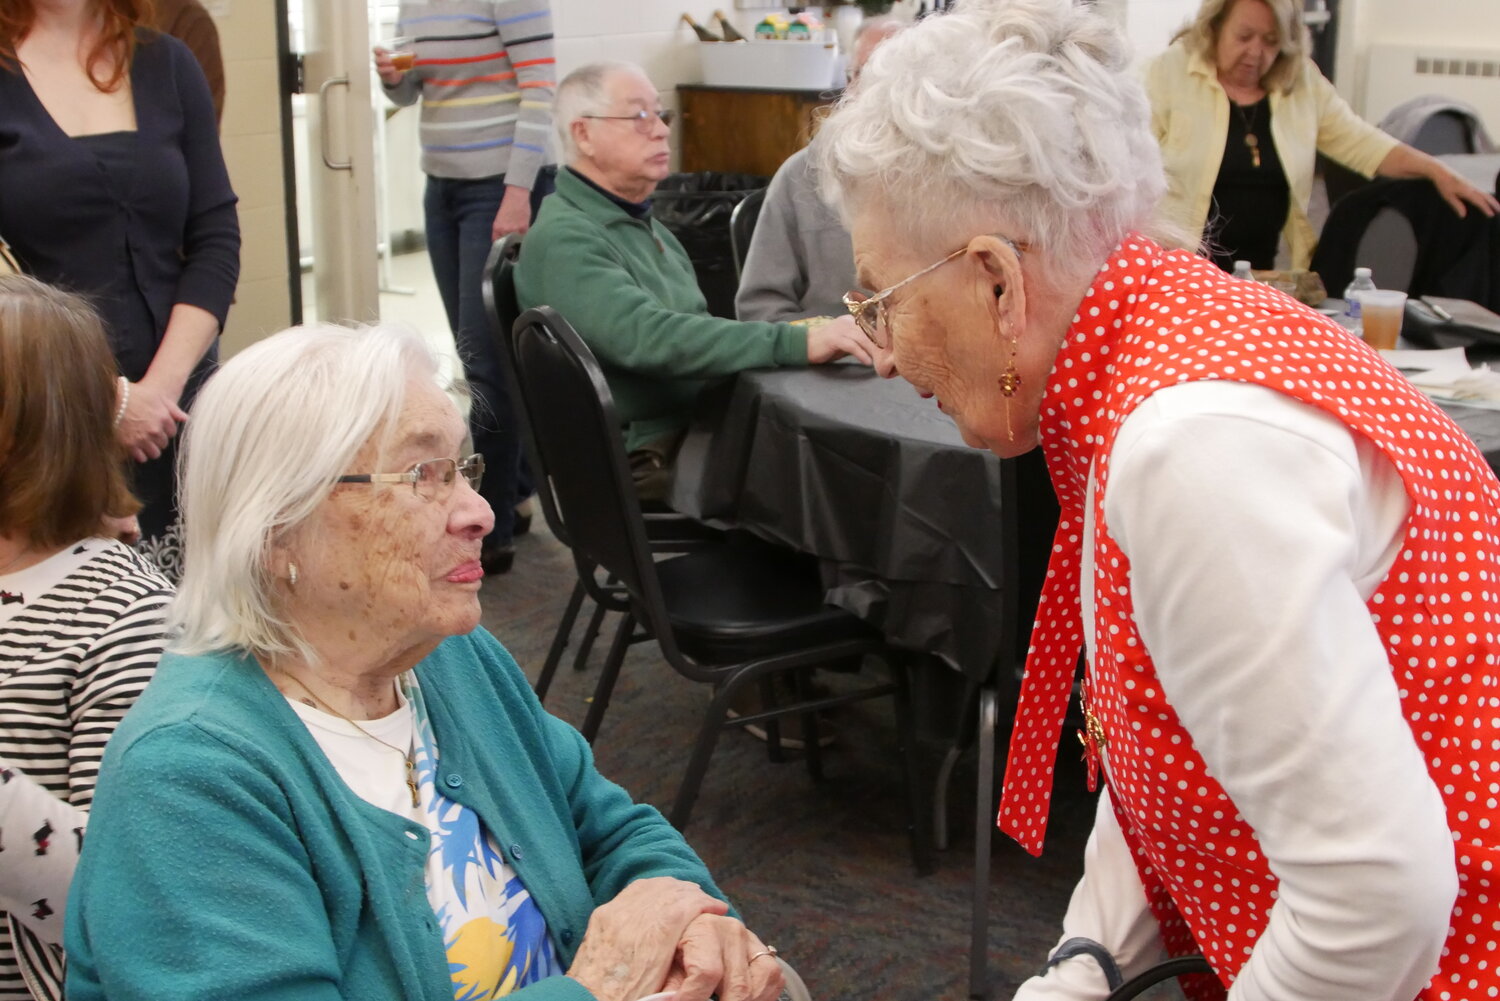 At the Central Bucks Senior Center in Doylestown, Mae Krier, 98, right, one of the original Rosie the Riveters of WWII, speaks to another original Rosie, Rita Colella, who is approaching her 102nd birthday in April.